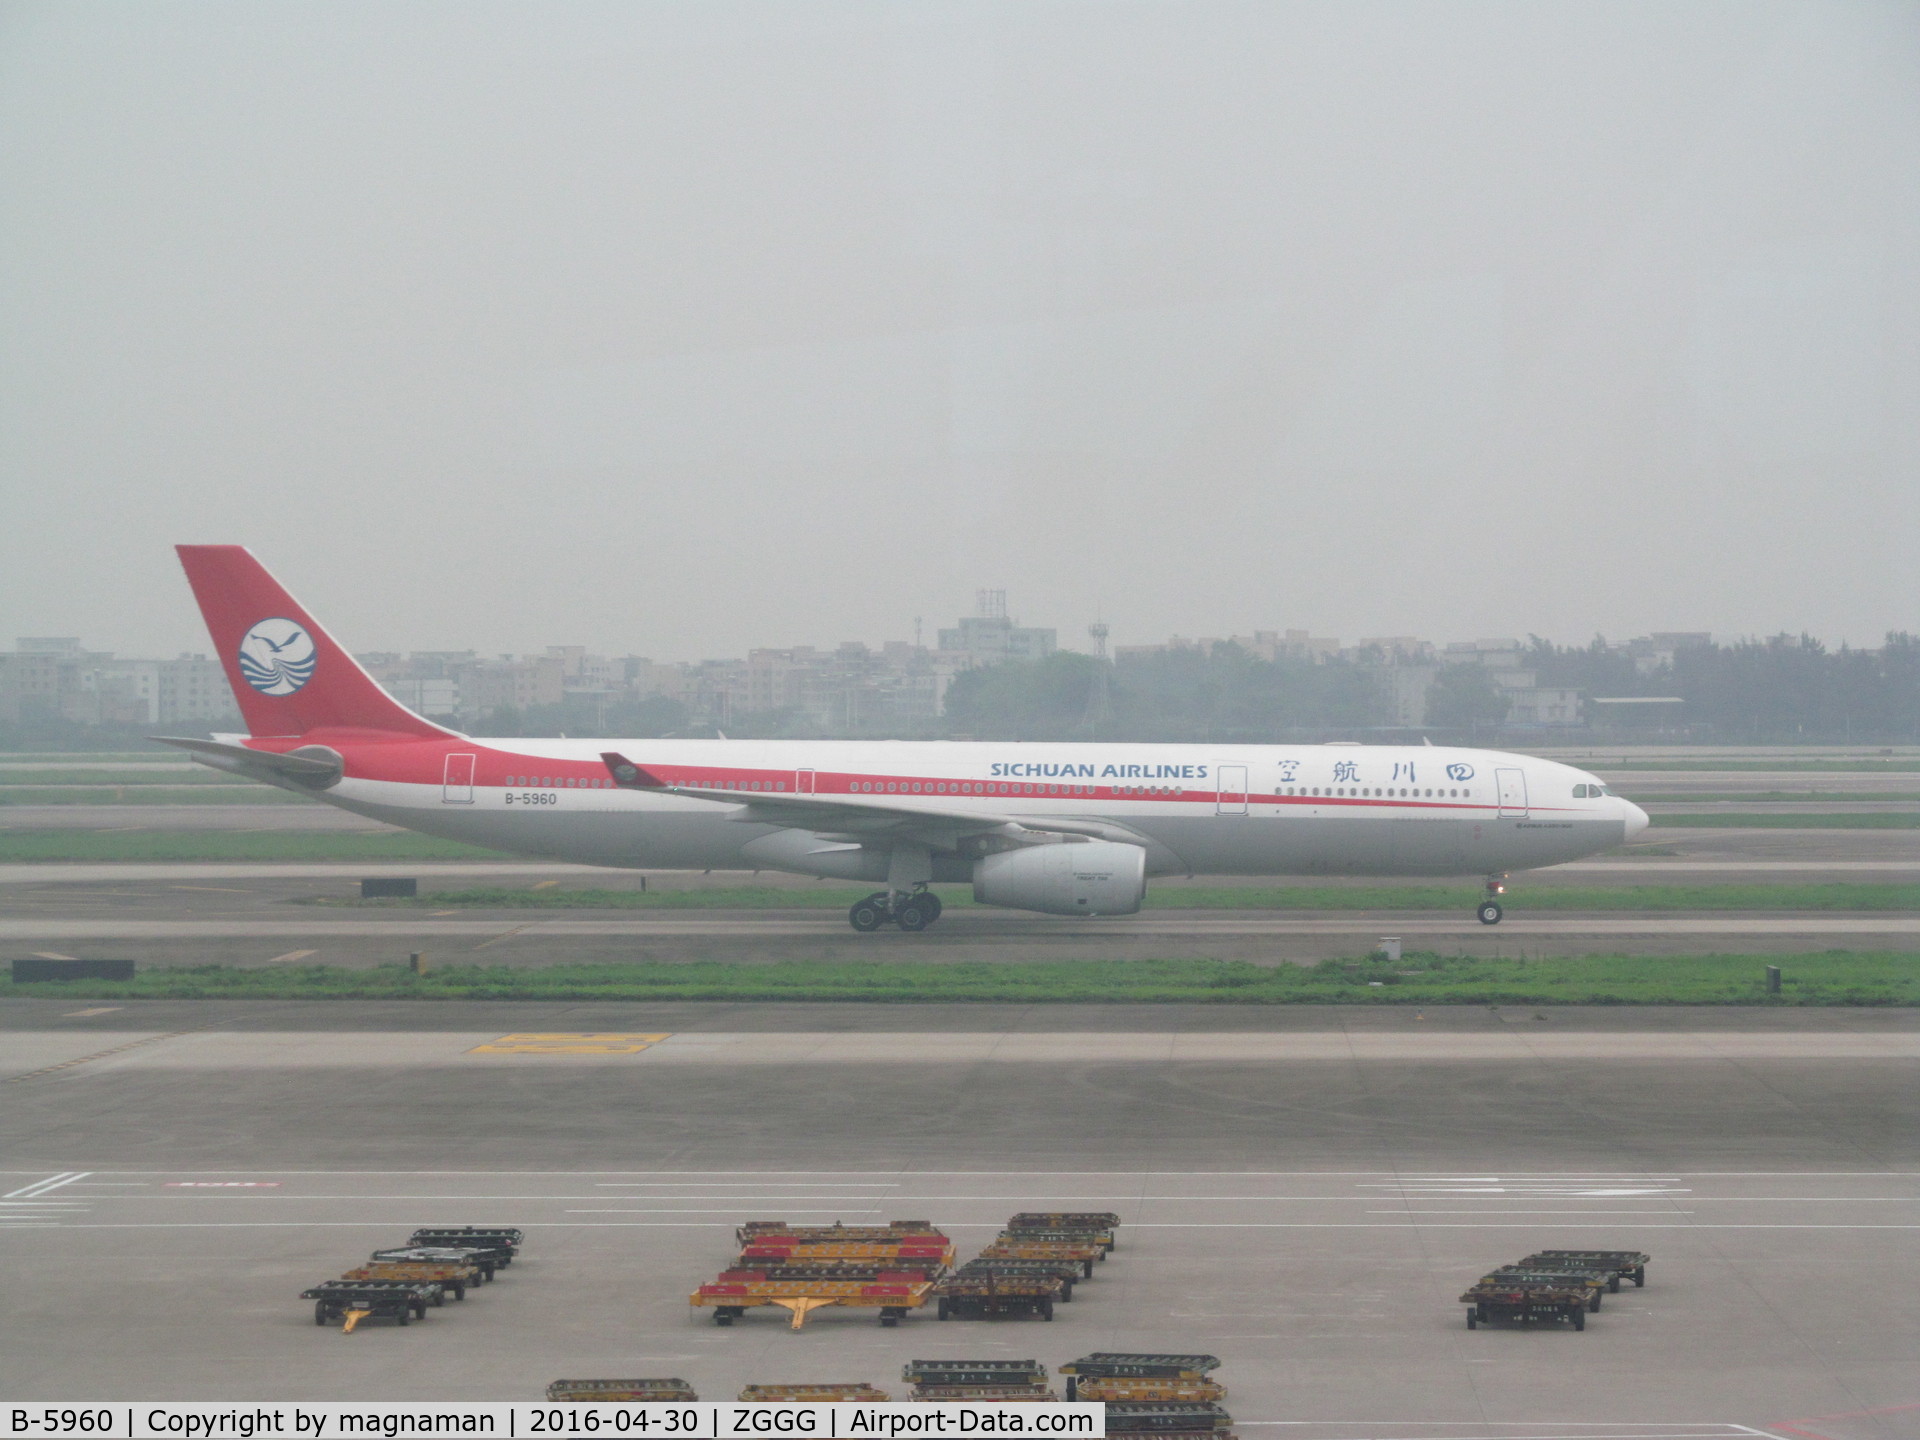 B-5960, 2014 Airbus A330-343 C/N 1579, taxying to stand at Guangzhou